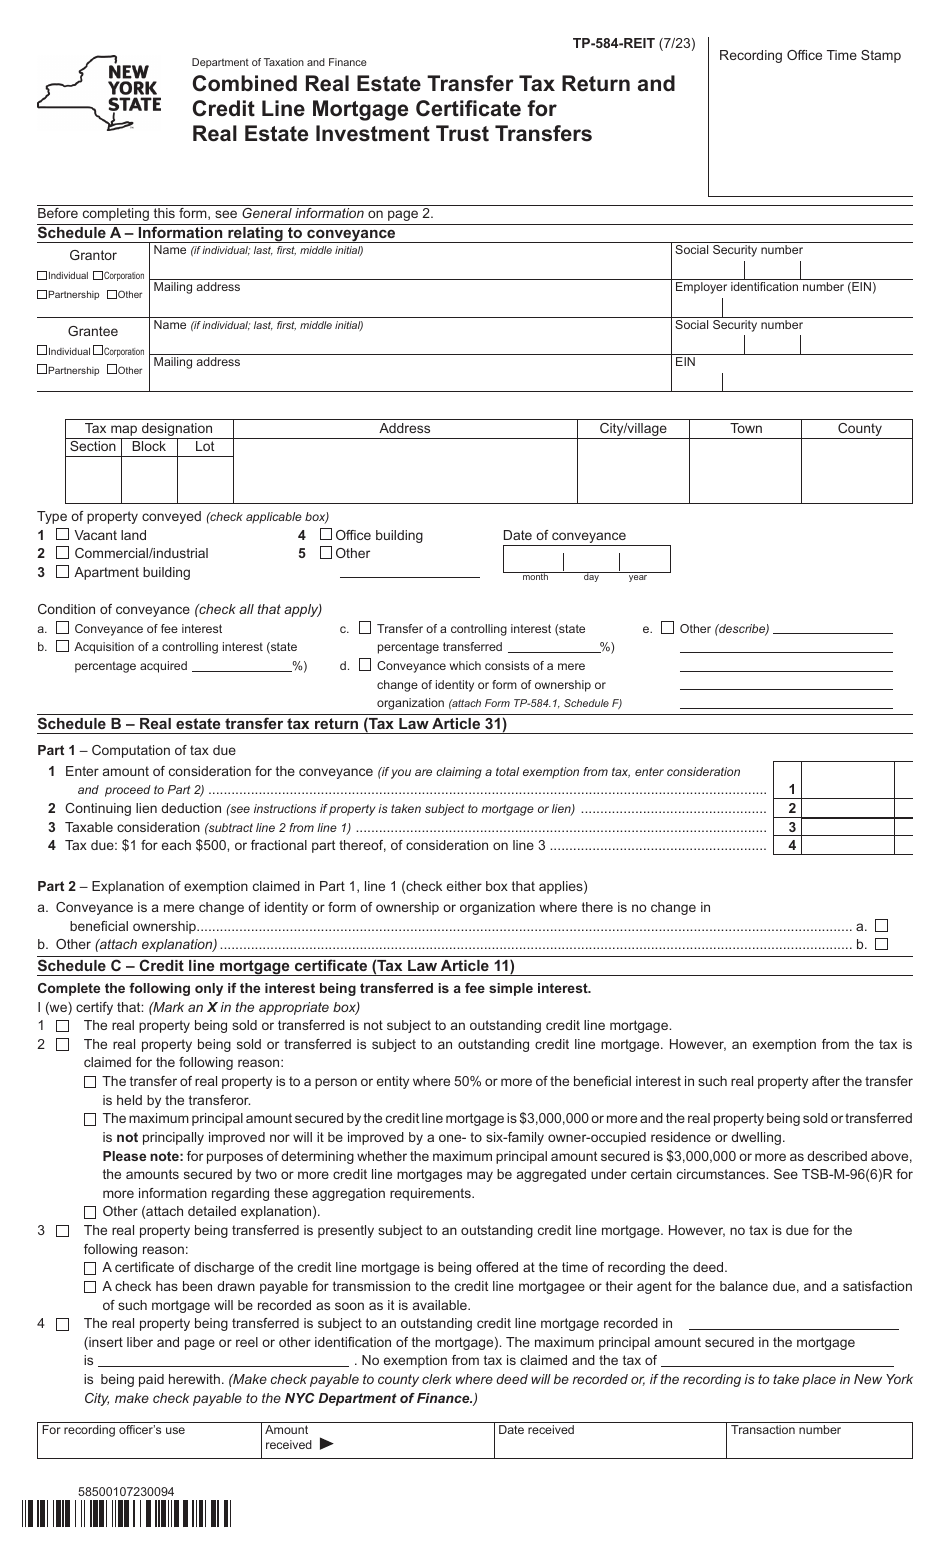 Form TP-584-REIT Combined Real Estate Transfer Tax Return and Credit Line Mortgage Certificate for Real Estate Investment Trust Transfers - New York, Page 1